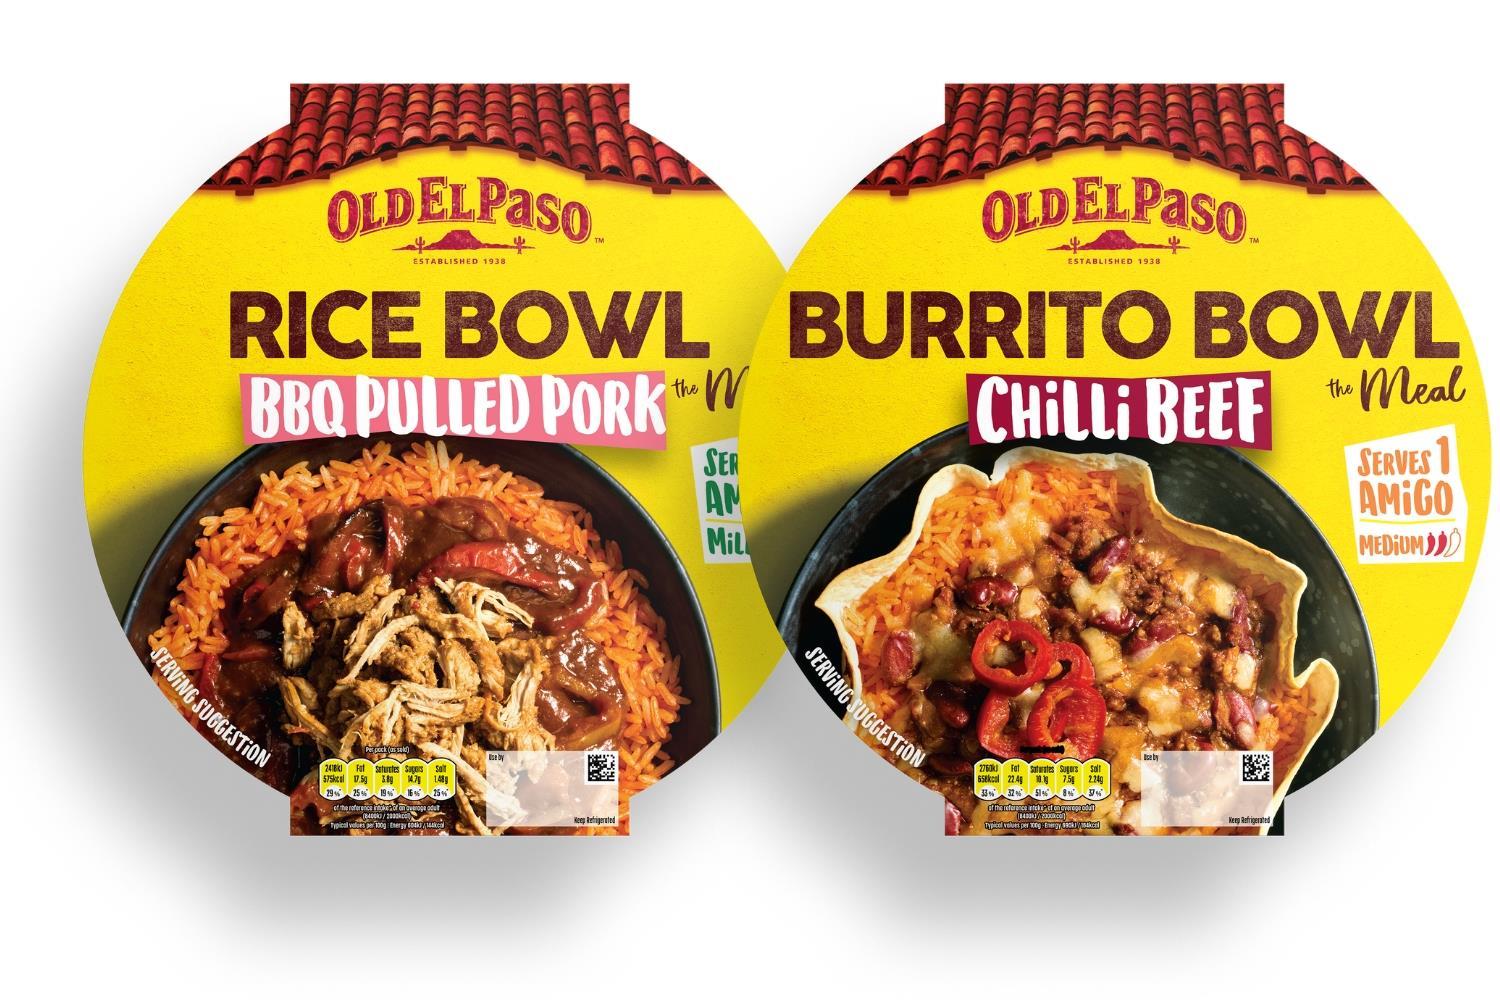 Old El Paso teams up with Samworth Brothers for ready meal range